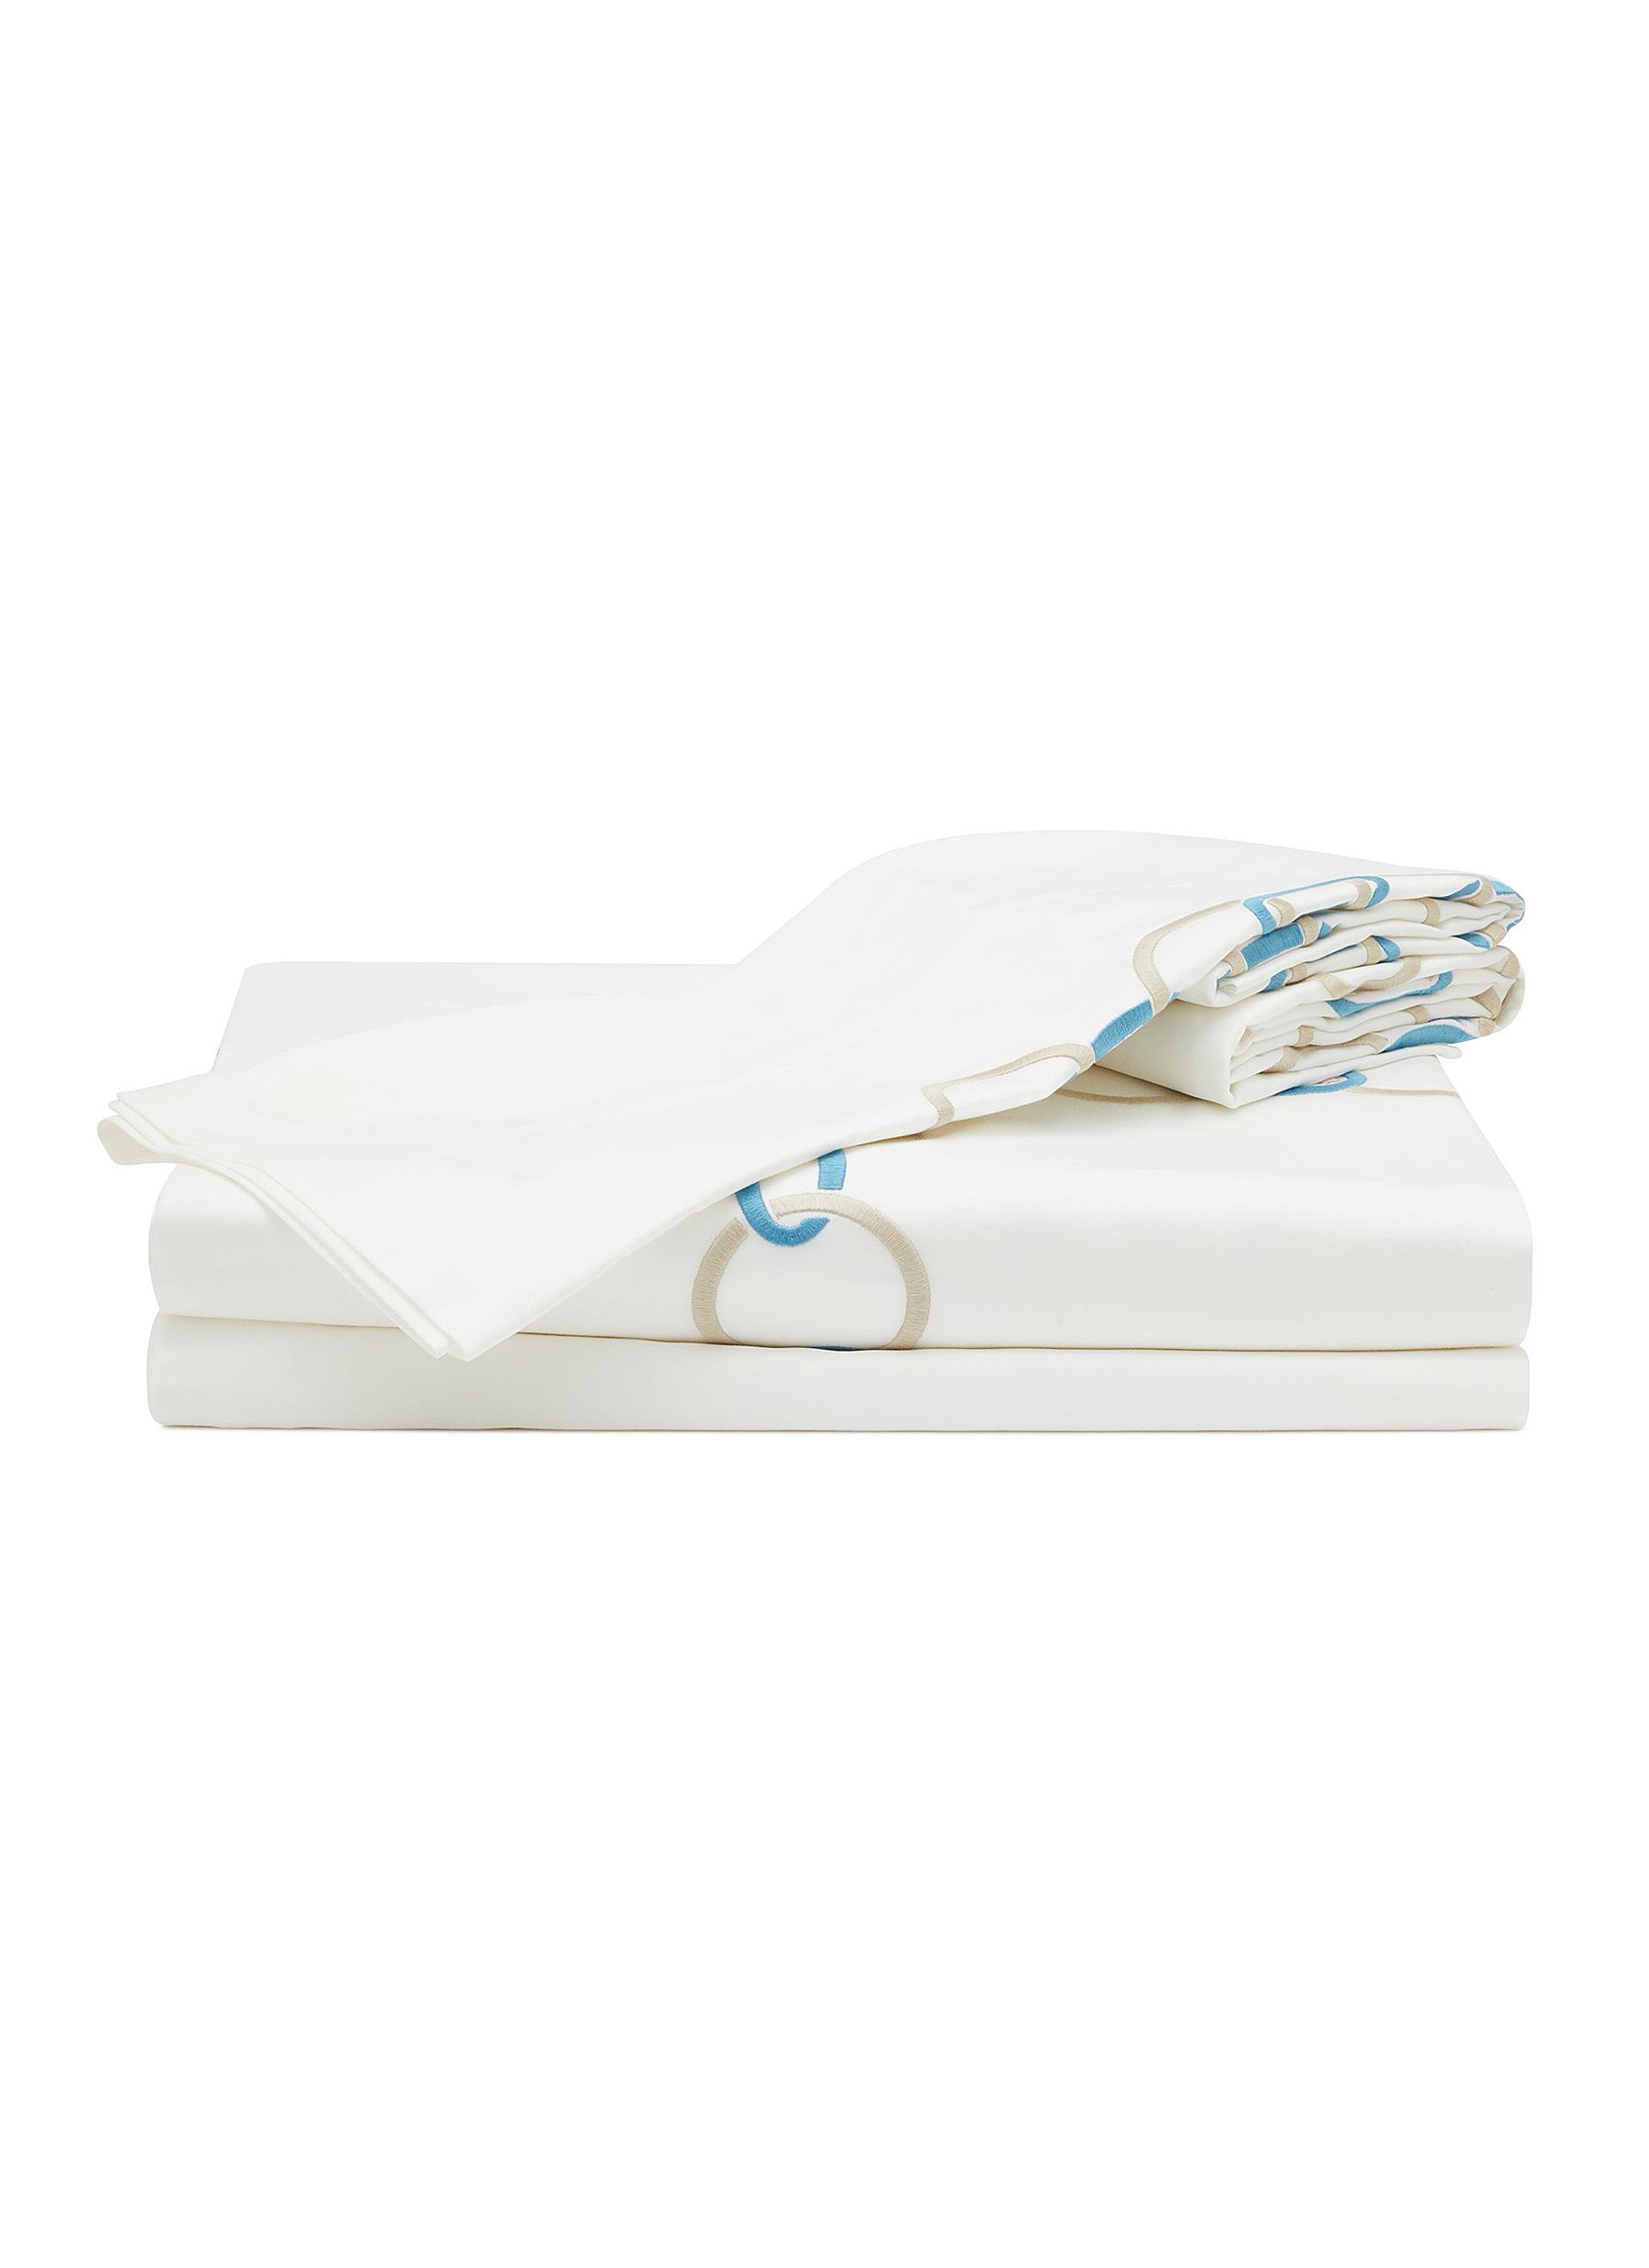 Links Queen Size Embroidered Duvet Set